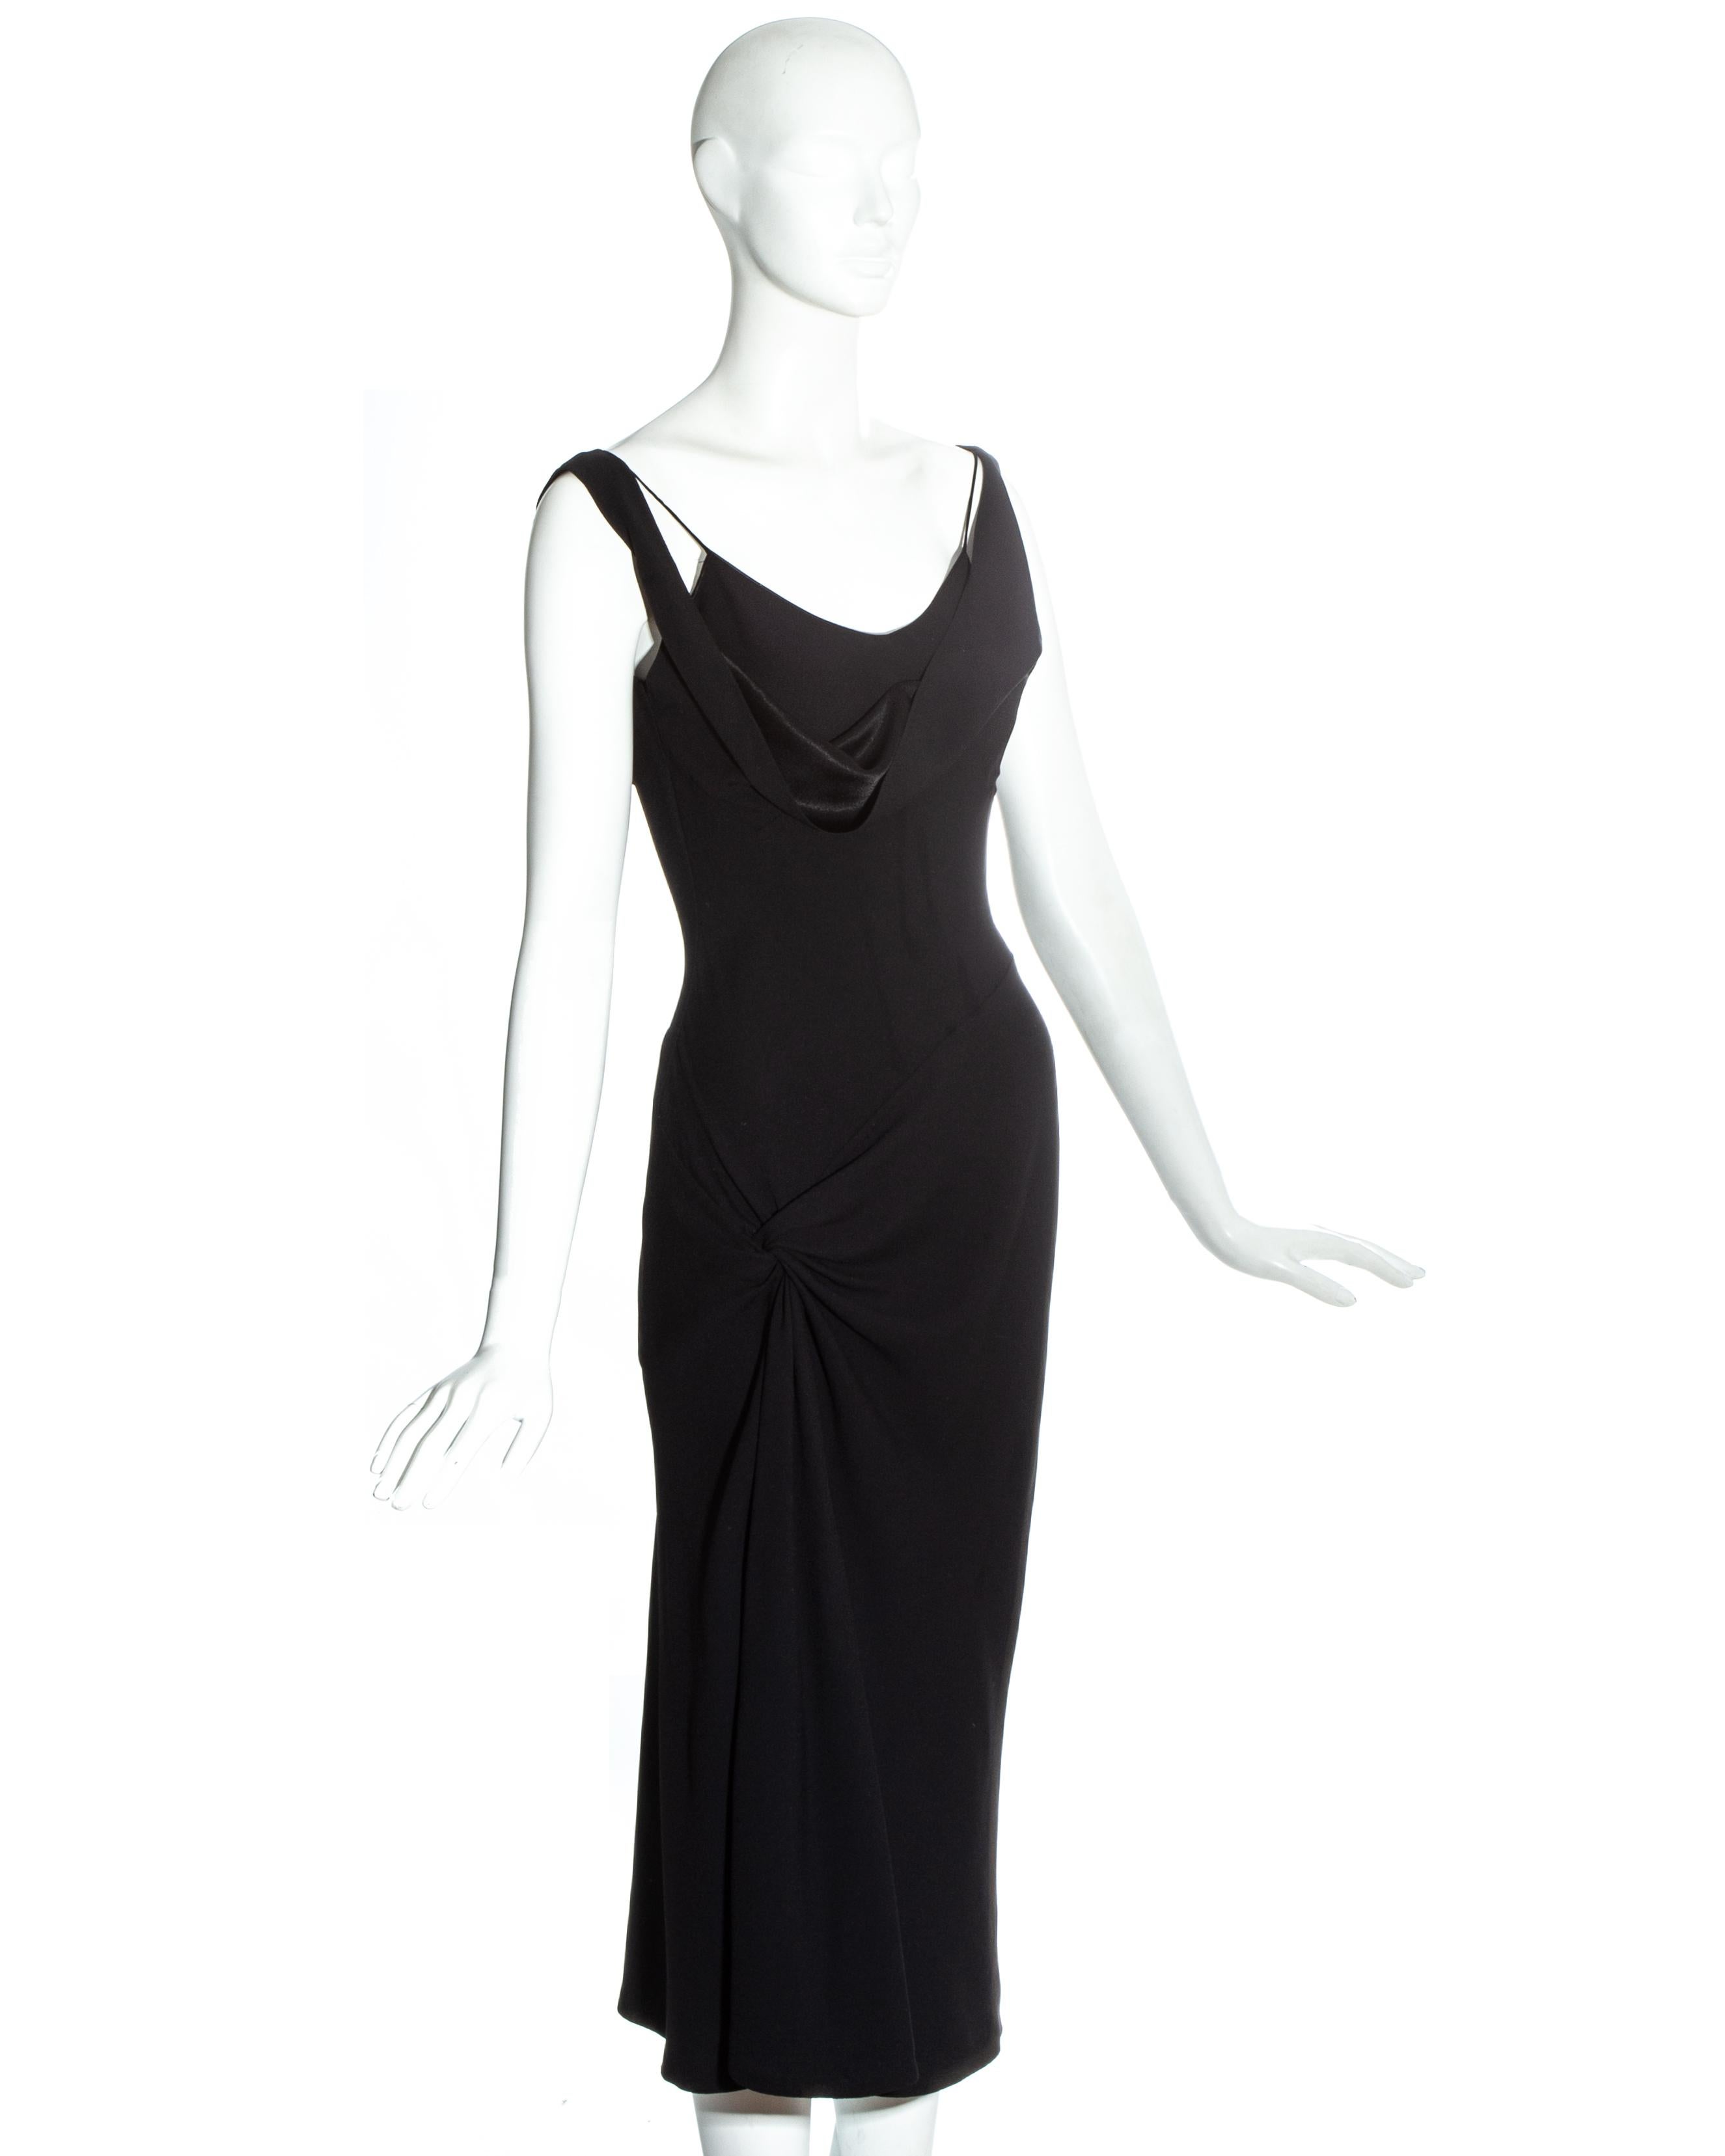 John Galliano black acetate mid-length evening dress with draped neckline with off-shoulder shoulder strap and twisted drape on right hip

Fall-Winter 1999